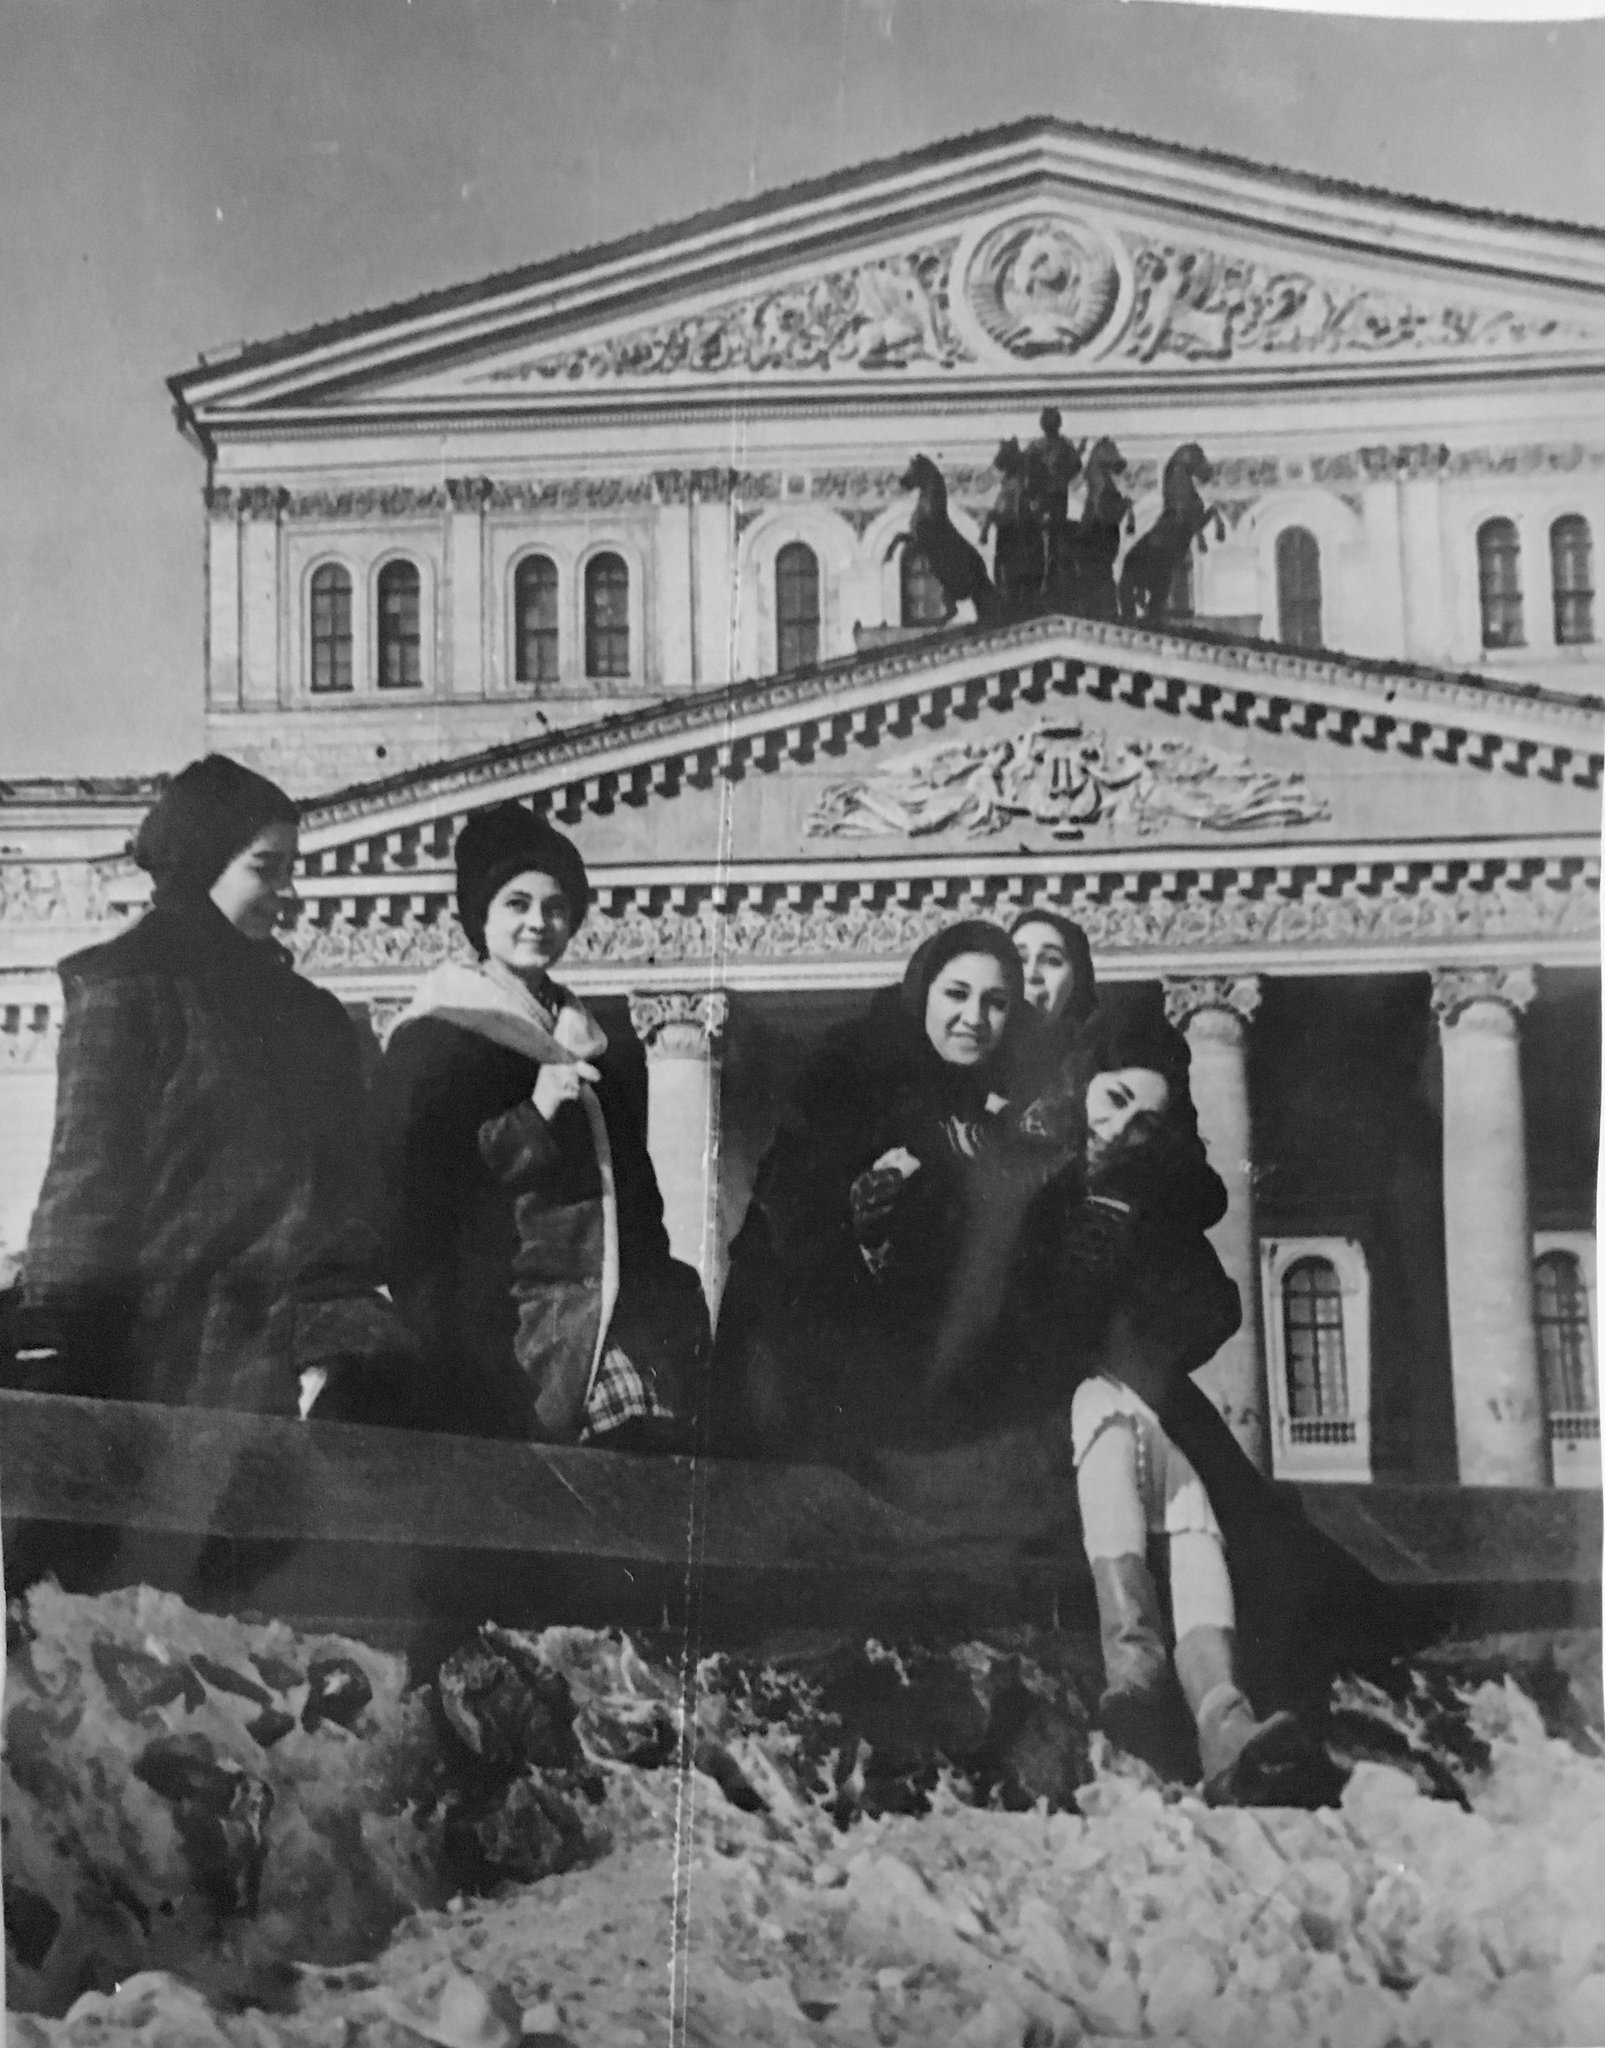 The five Egyptian ballet dancers pose in front of the Bolshoi Ballet in Moscow (image: Magda Saleh)